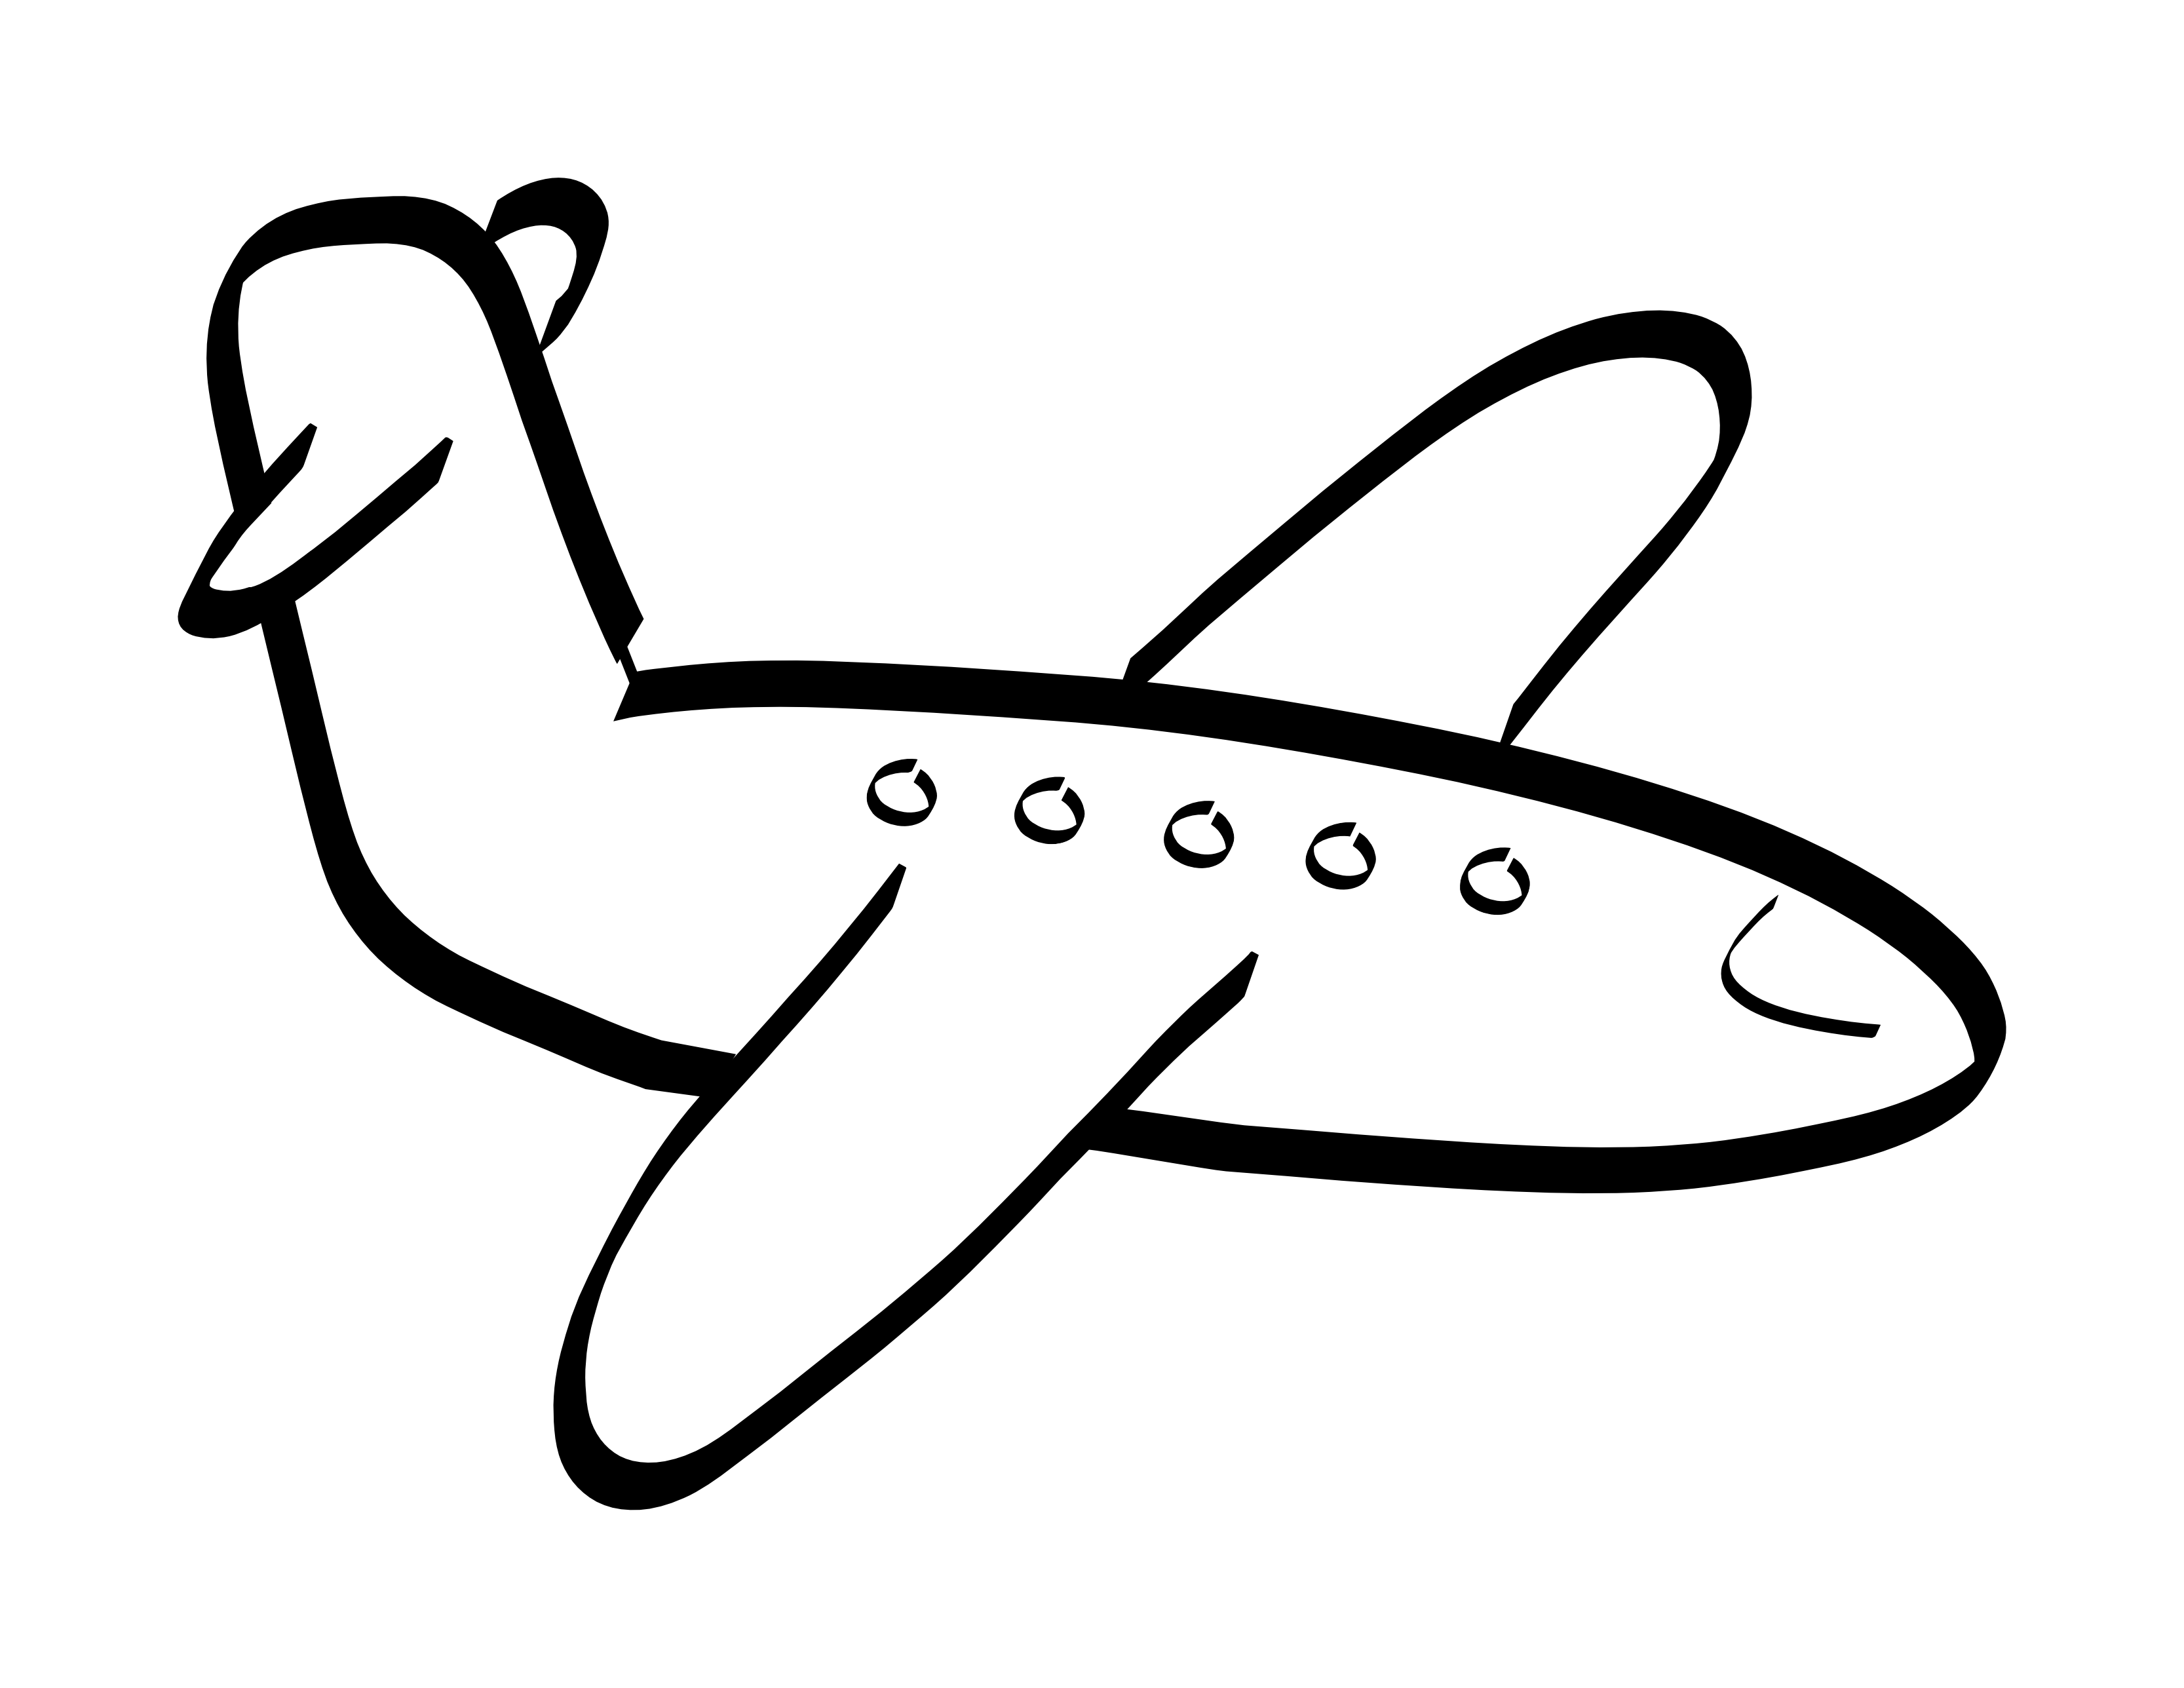 Simple airplane coloring page. Google clipart black and white